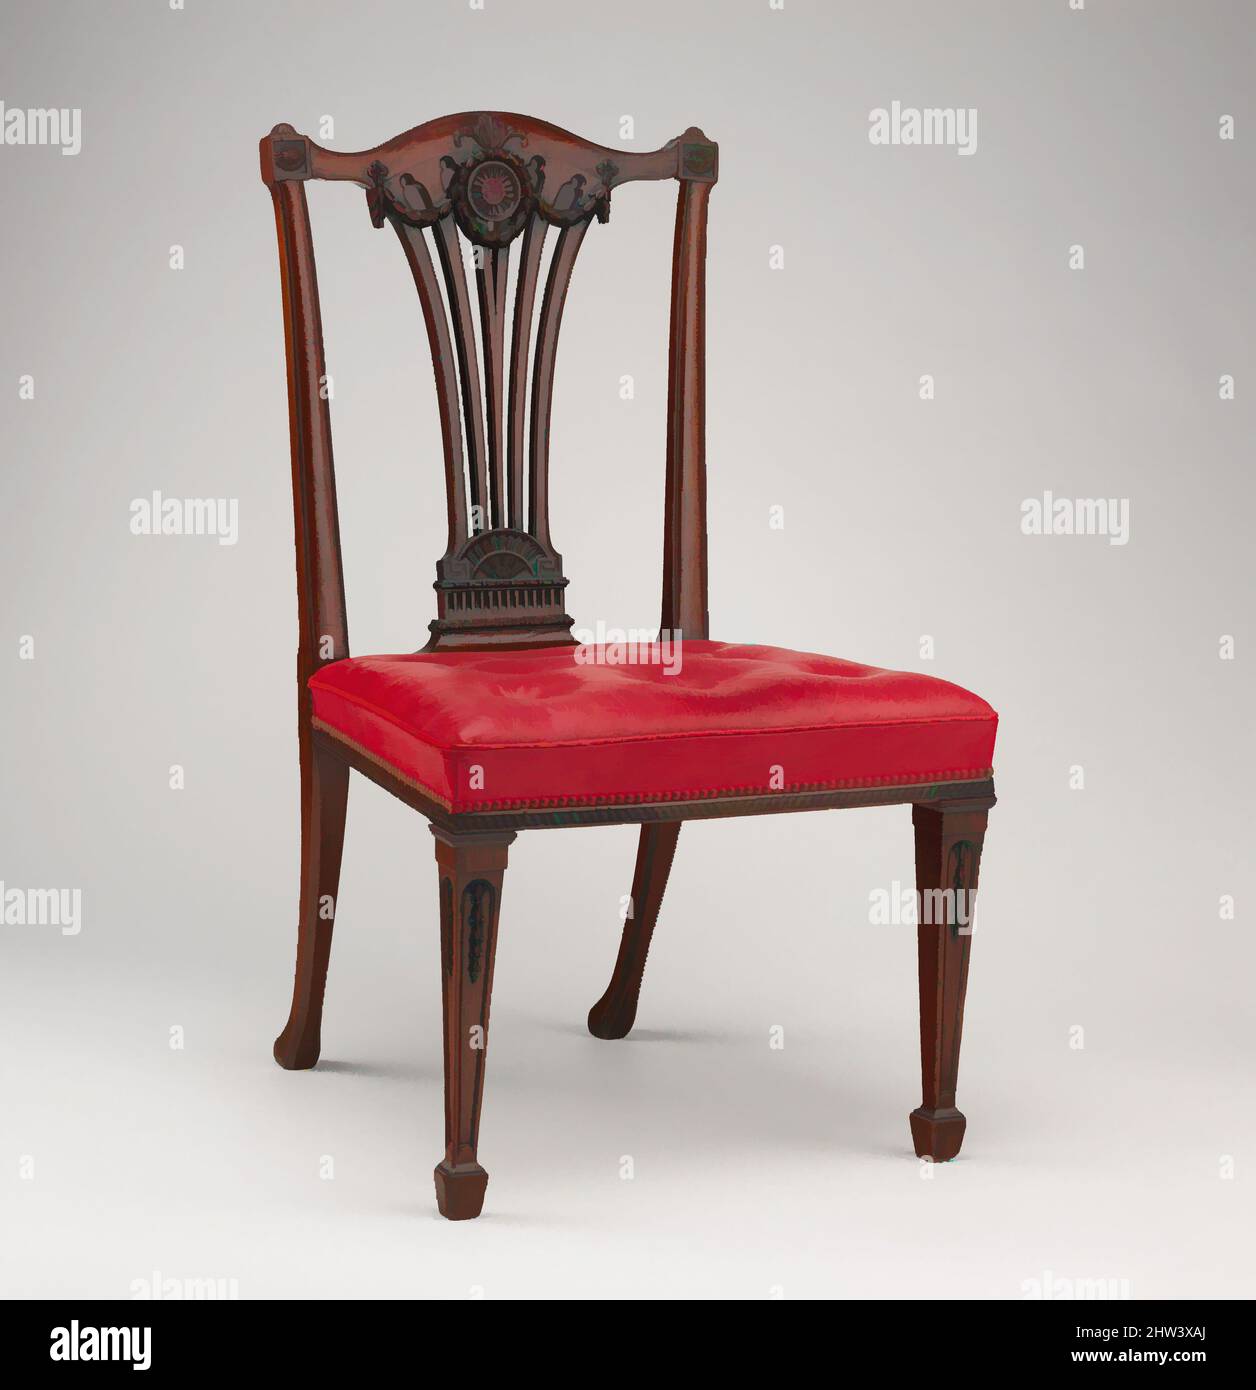 Art inspired by Set of fourteen side chairs, Thomas Chippendale (British, baptised Otley, West Yorkshire 1718–1779 London), ca. 1772, British, Mahogany, covered in modern red morocco leather, Each: H. 38 1/4 x W. 22 x D. 22 1/2 in. (97.2 x 55.9 x 57.1 cm), Woodwork-Furniture, Thomas, Classic works modernized by Artotop with a splash of modernity. Shapes, color and value, eye-catching visual impact on art. Emotions through freedom of artworks in a contemporary way. A timeless message pursuing a wildly creative new direction. Artists turning to the digital medium and creating the Artotop NFT Stock Photo